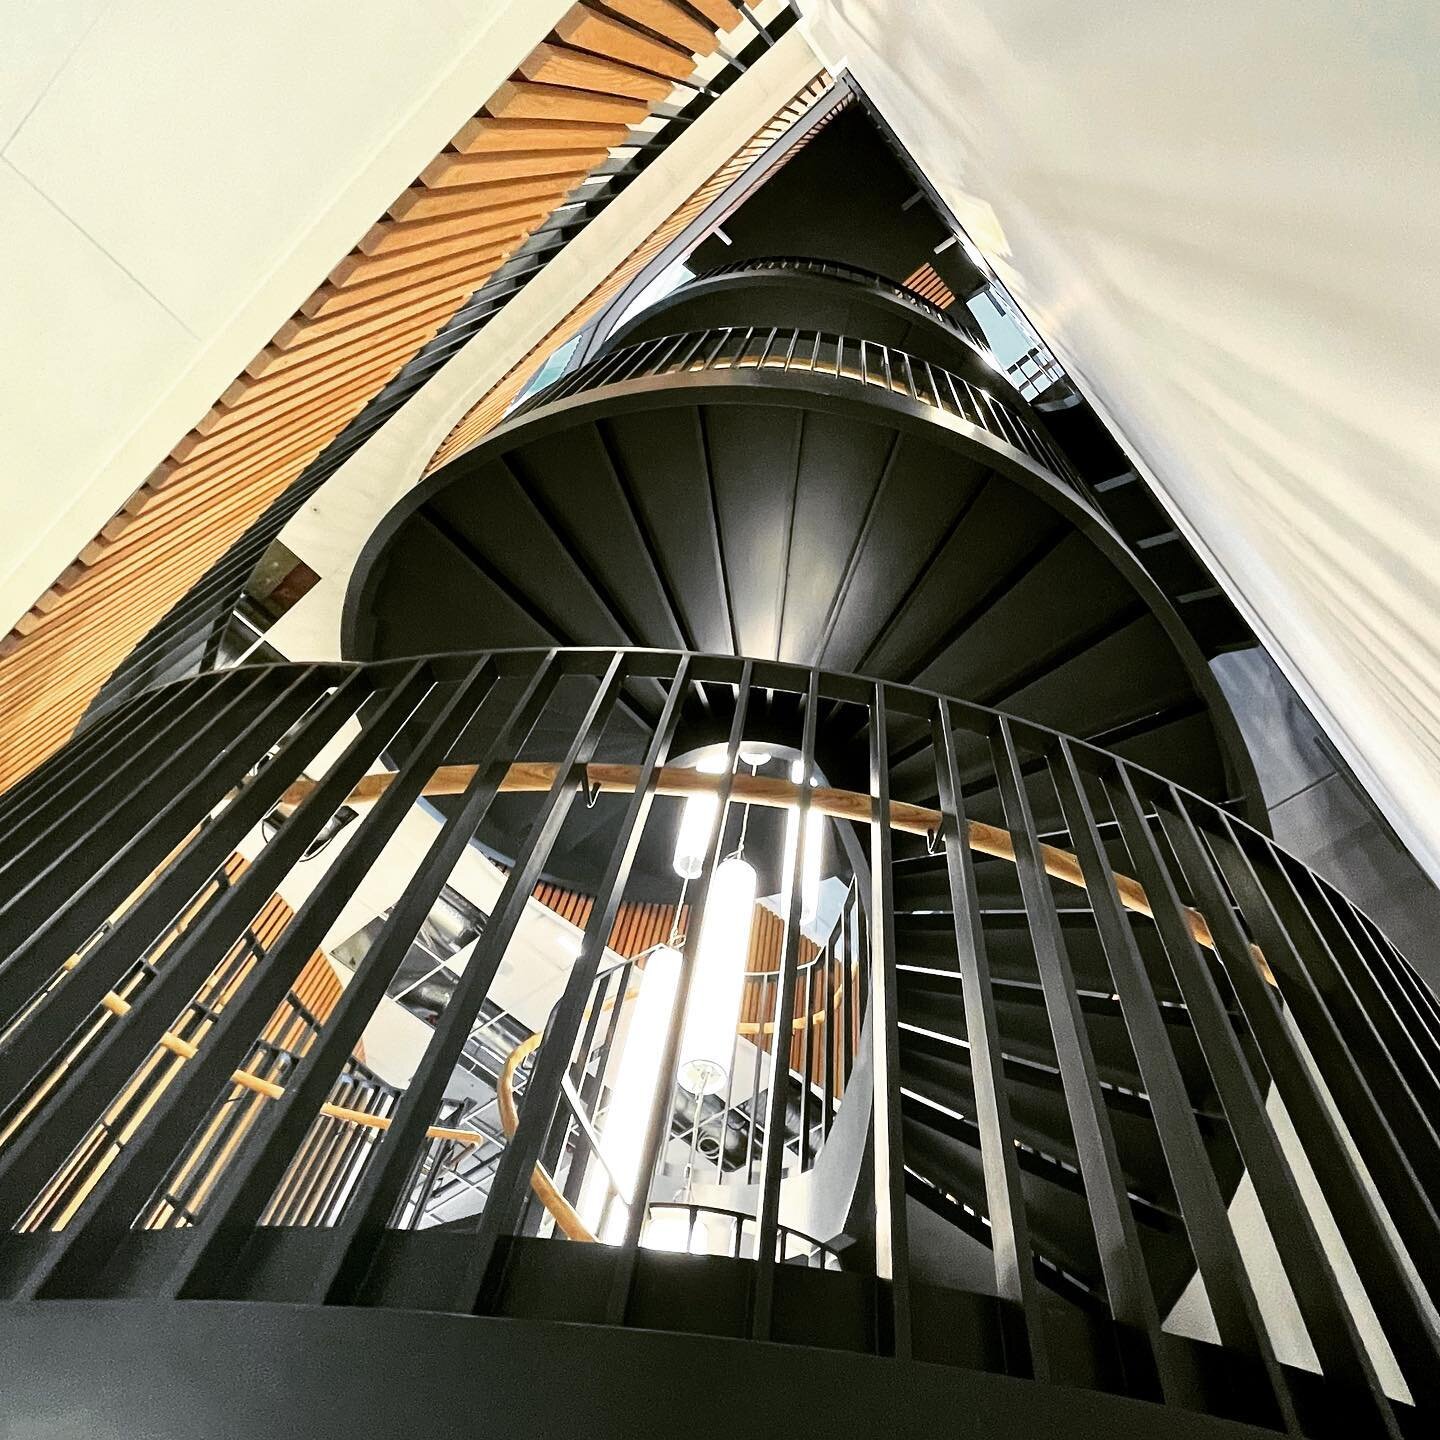 The purpose of a good #interiordesign is to inspire and enlight. Well-designed interiors make you feel calm and pleasant. A great #staircase can raise value of an interior to a great extent. And that has been our purpose for the last 19 years.
.
.
.
